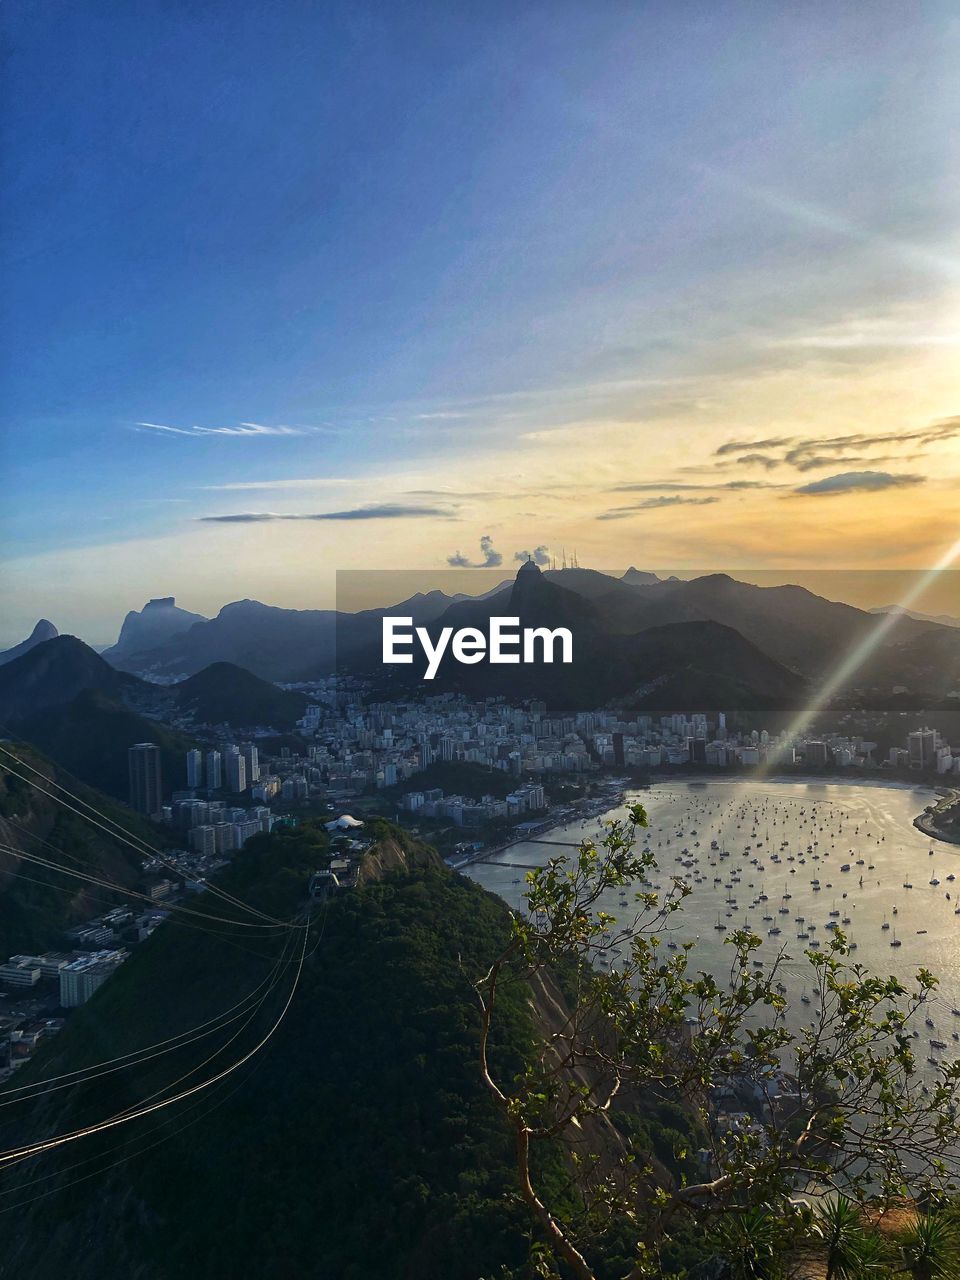 Río de janeiro from above. sightseeing, sunset at sugar loaf mountain 